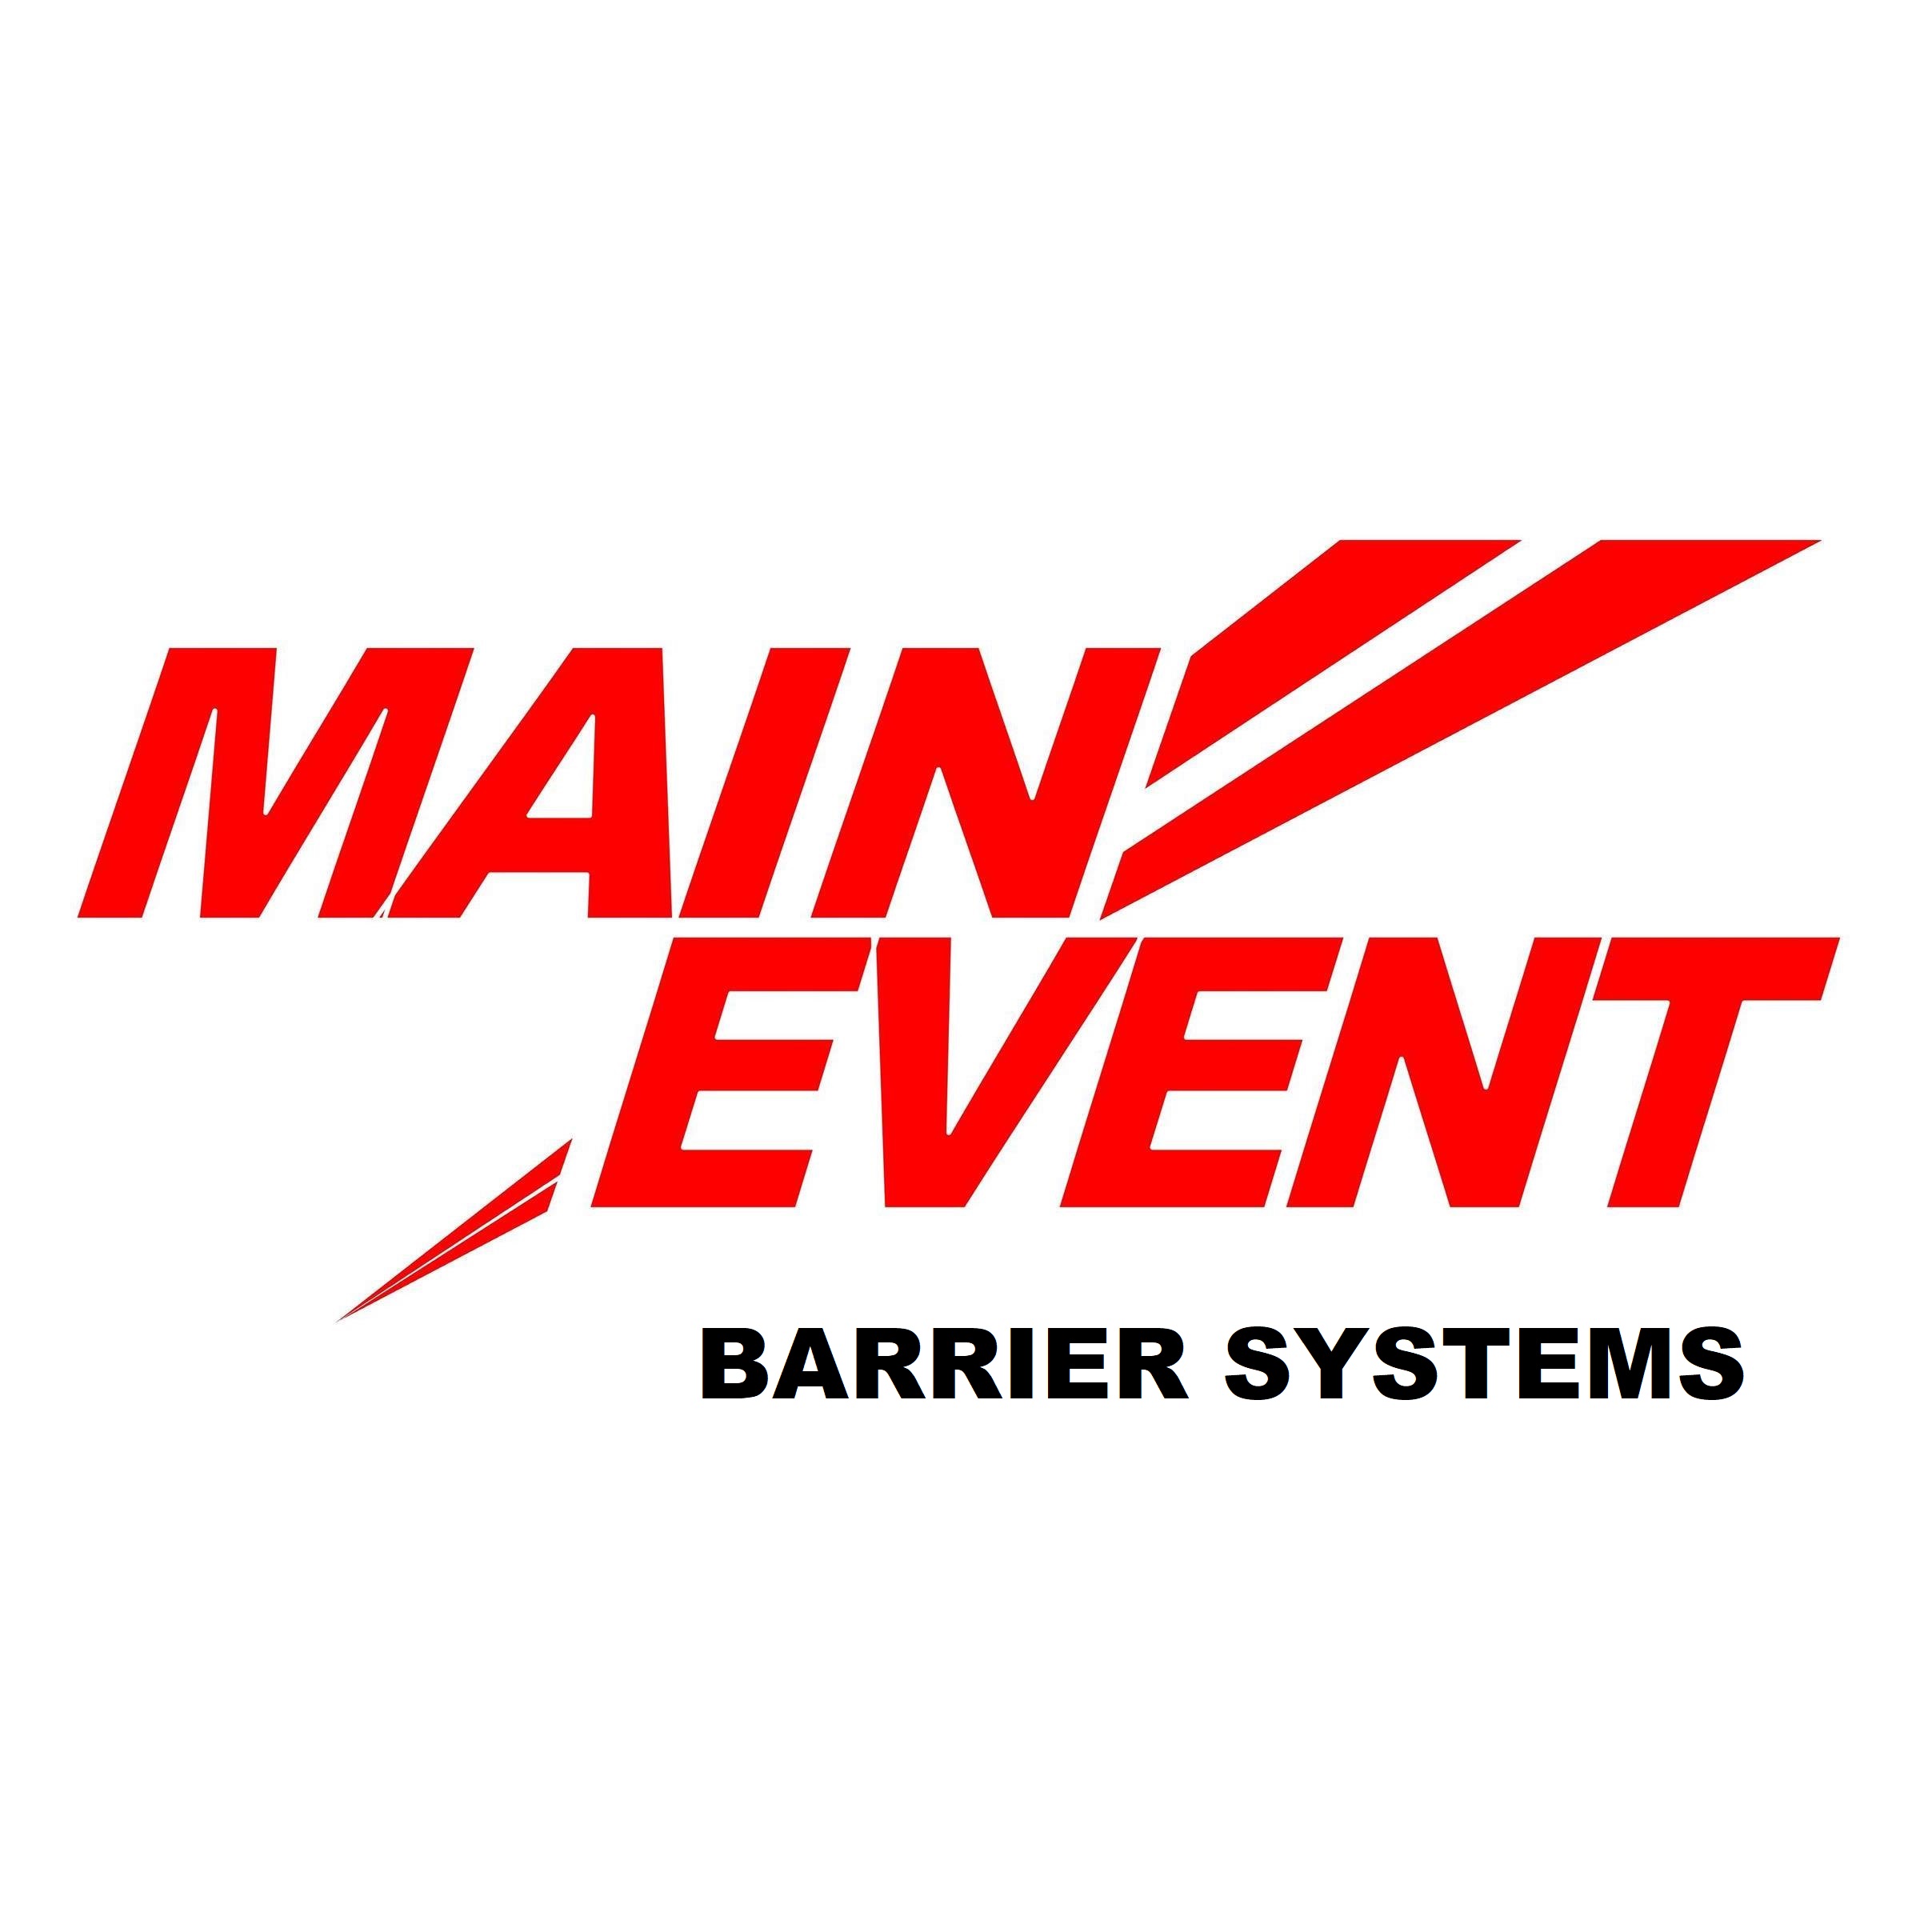 Main Event Barrier Systems